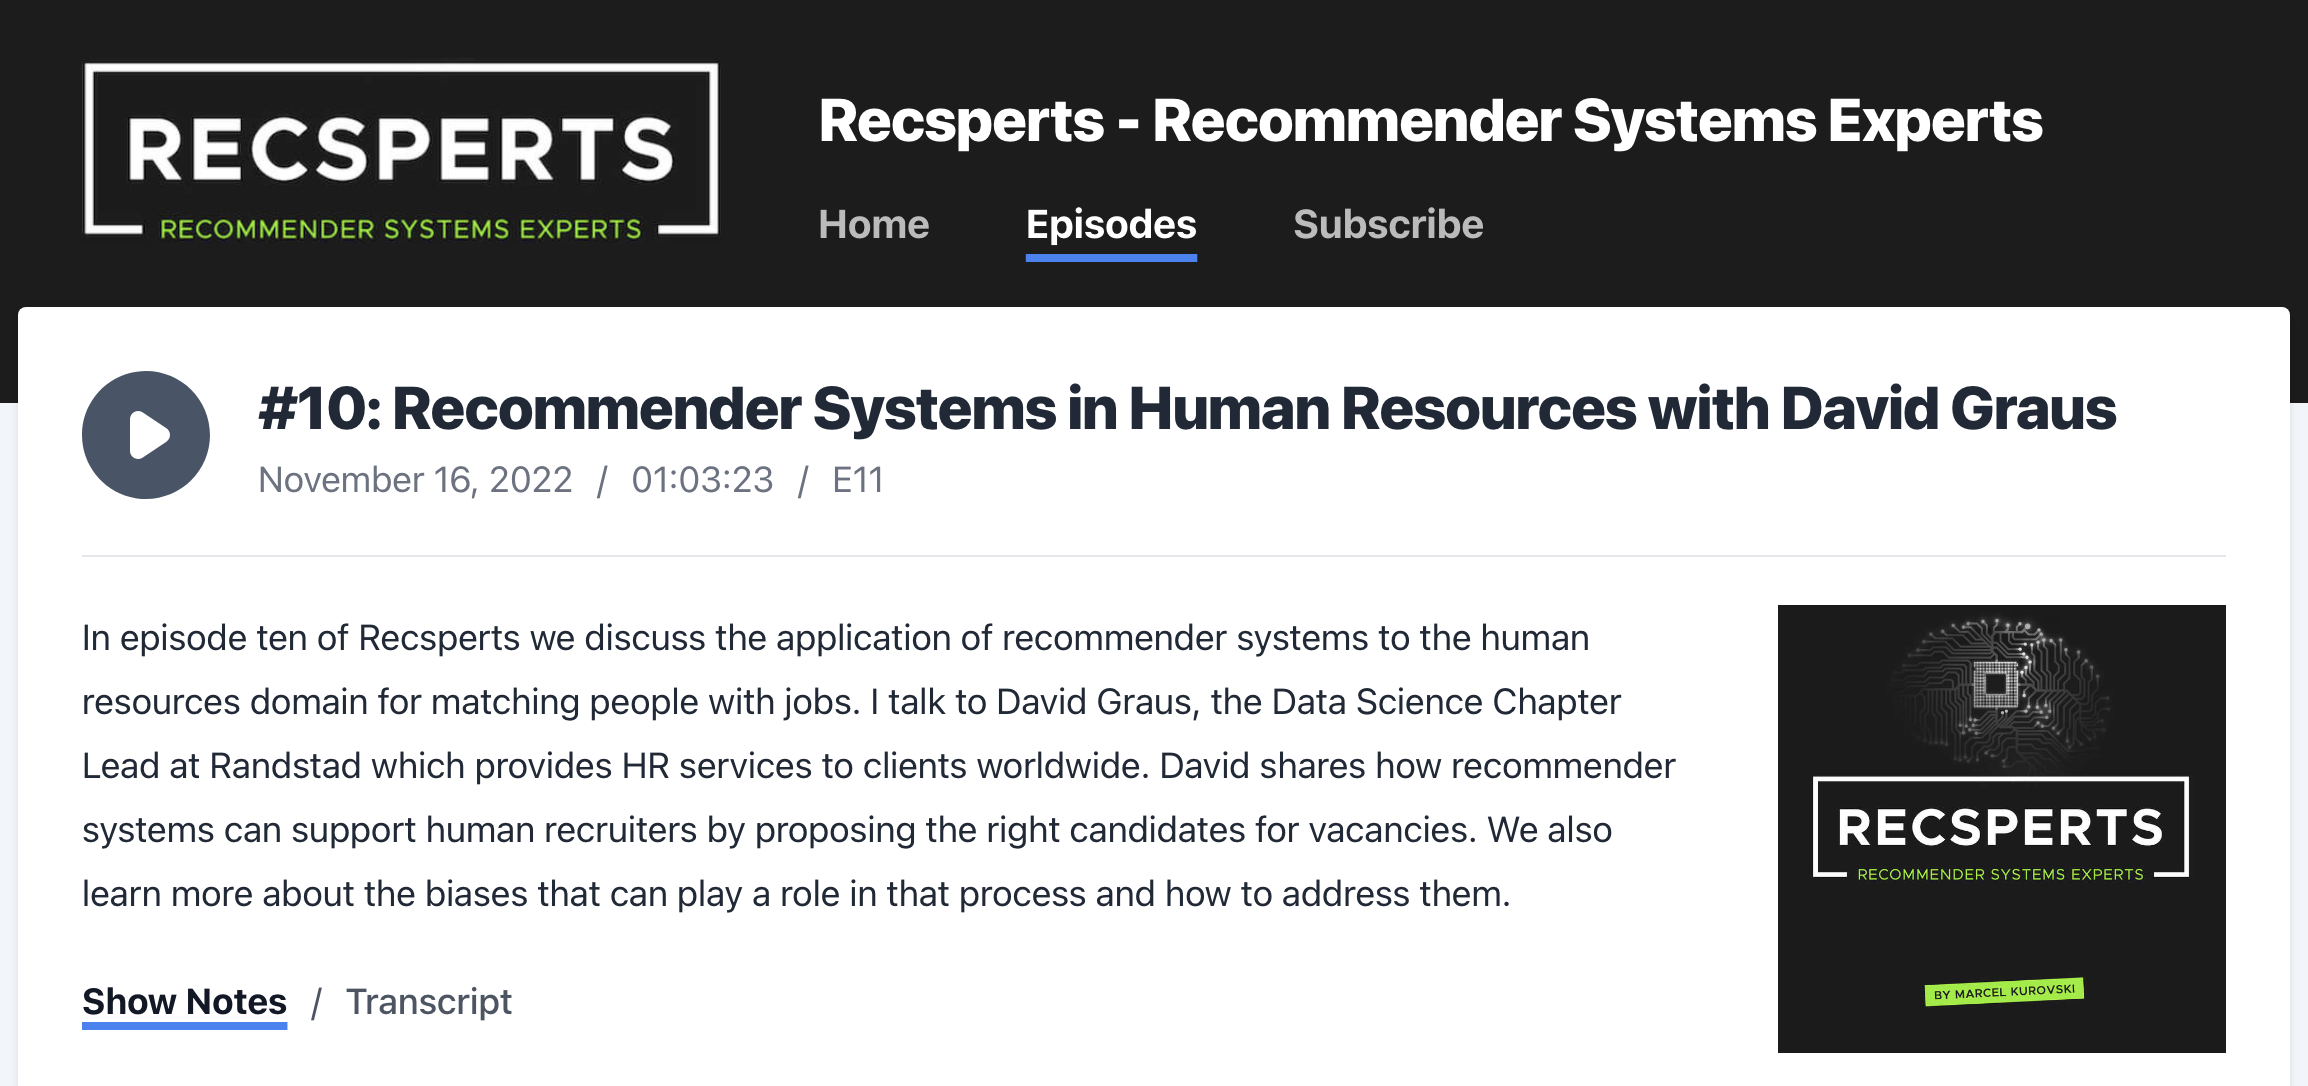 Featured in Recsperts on ‘Recommender Systems in Human Resources’